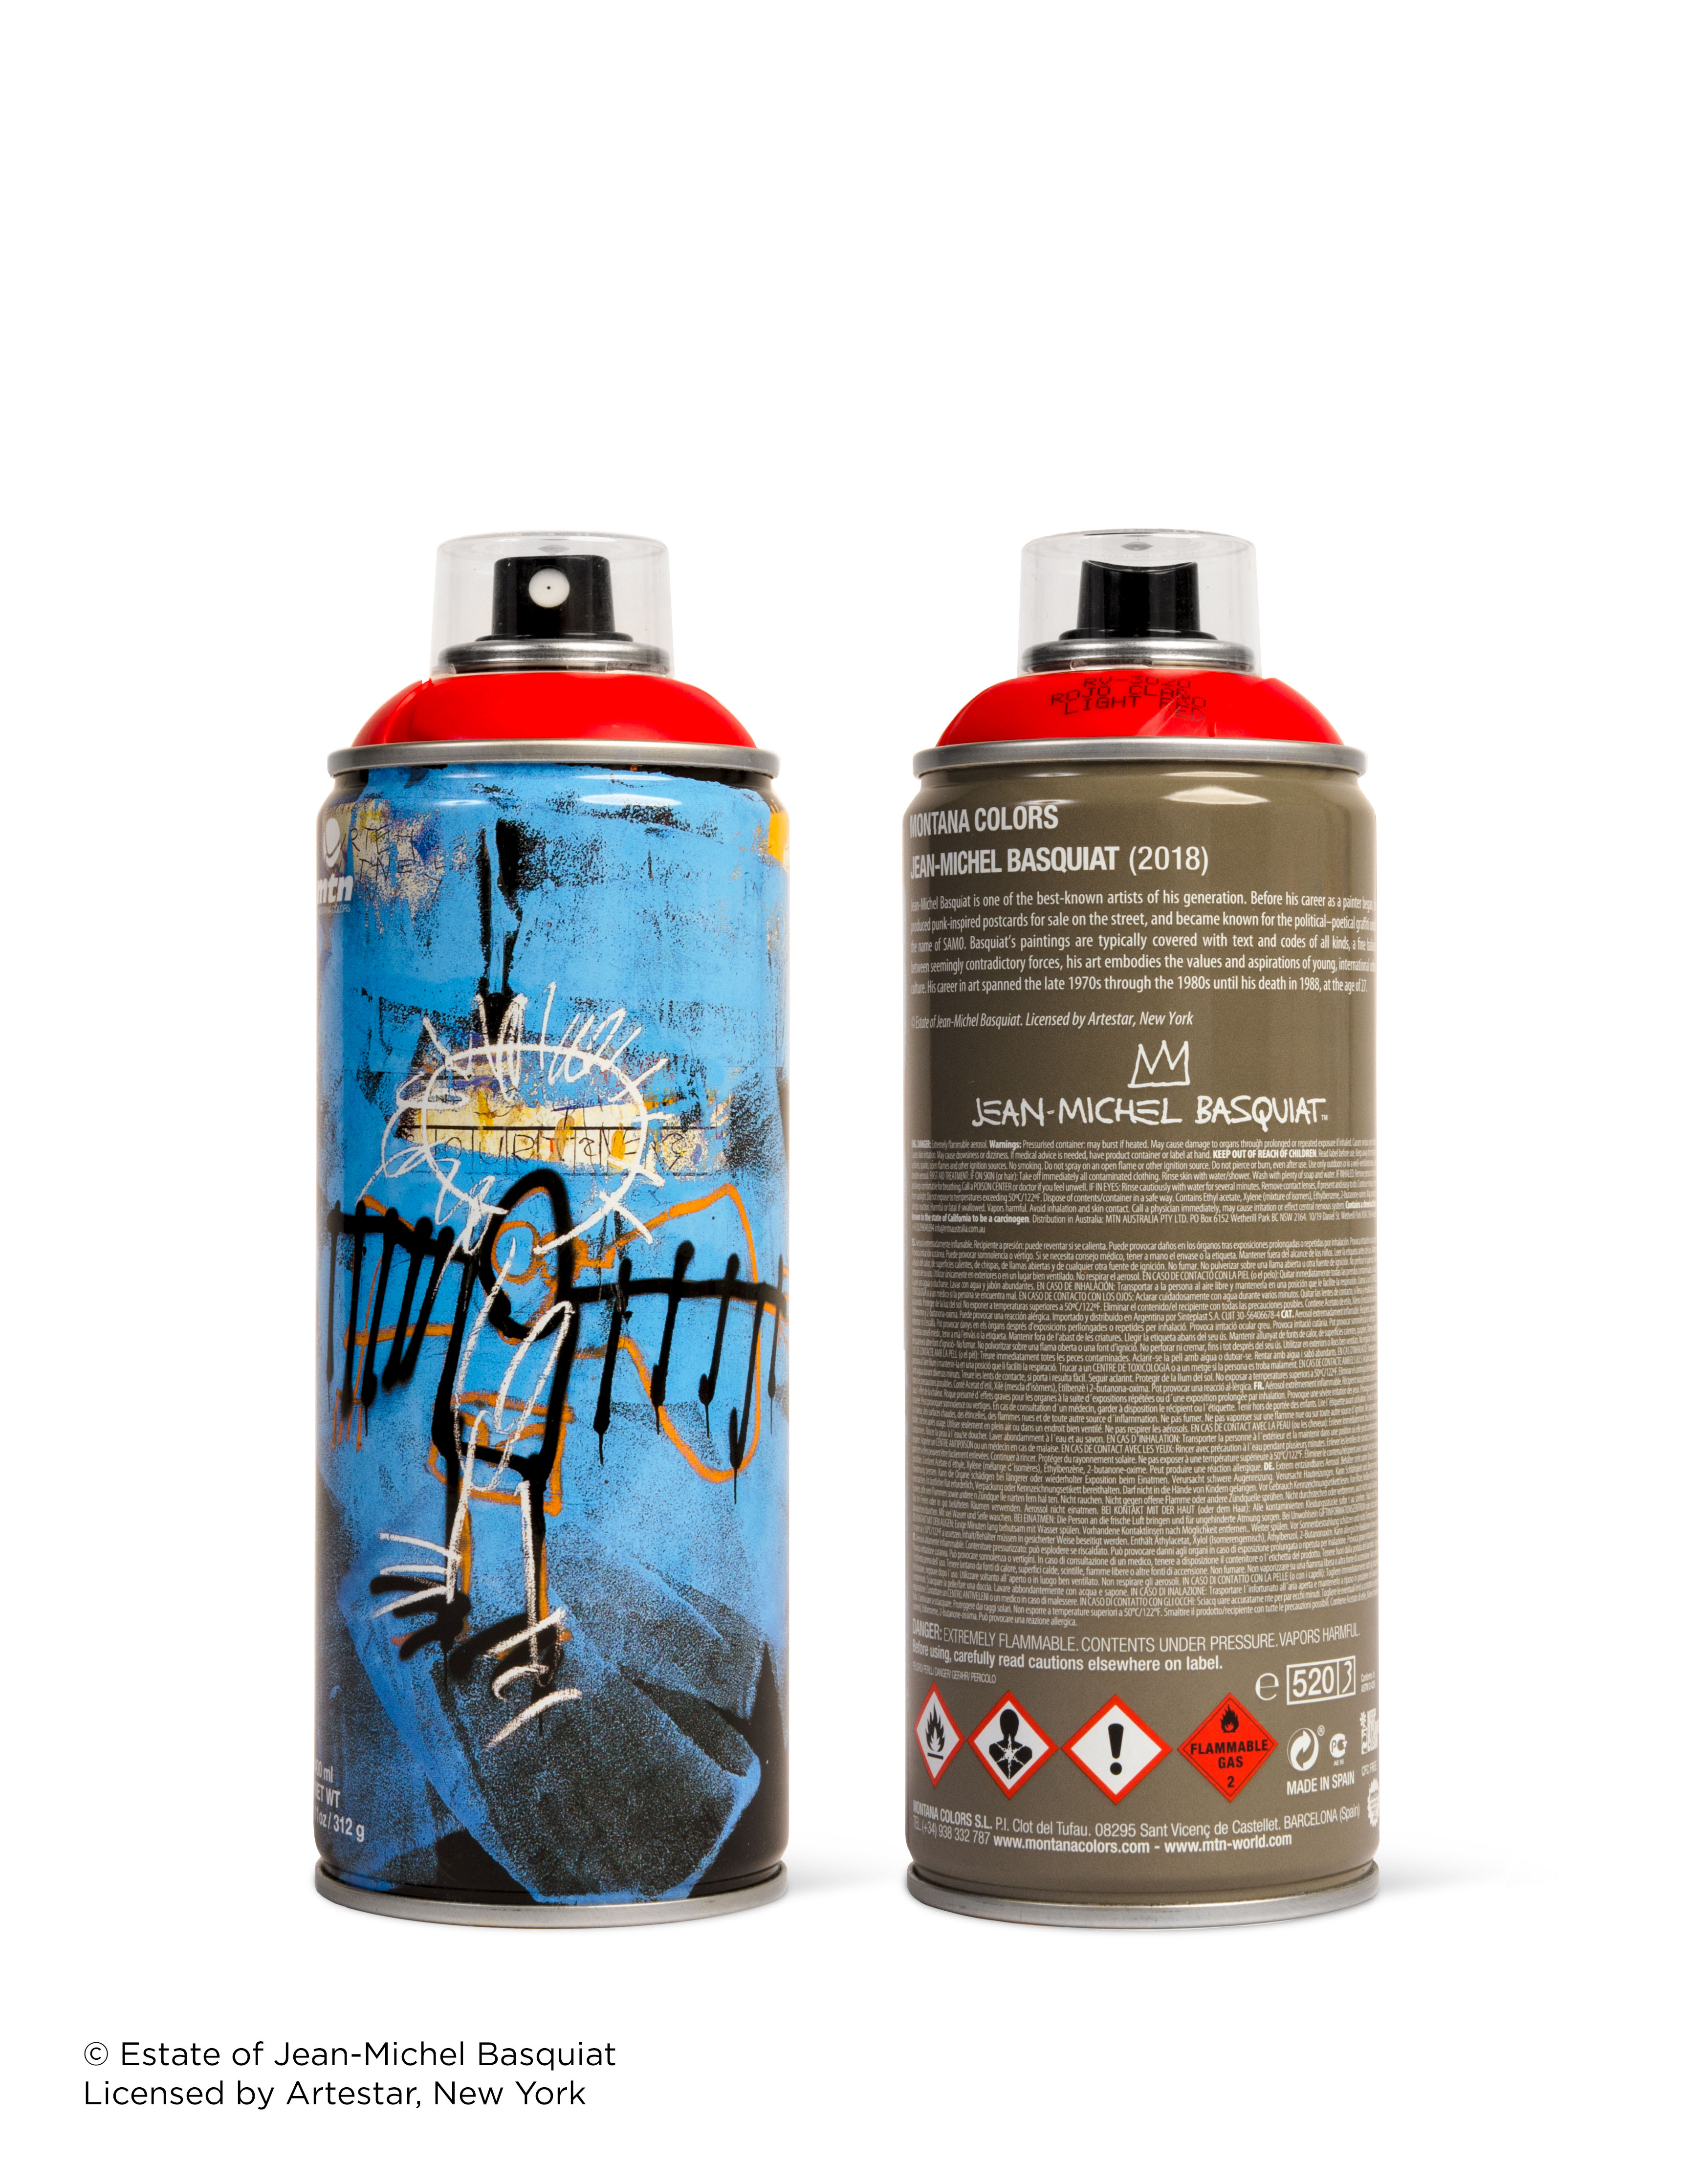 Blue Jean-Michel Basquiat spray paint can for Beyond The Streets.